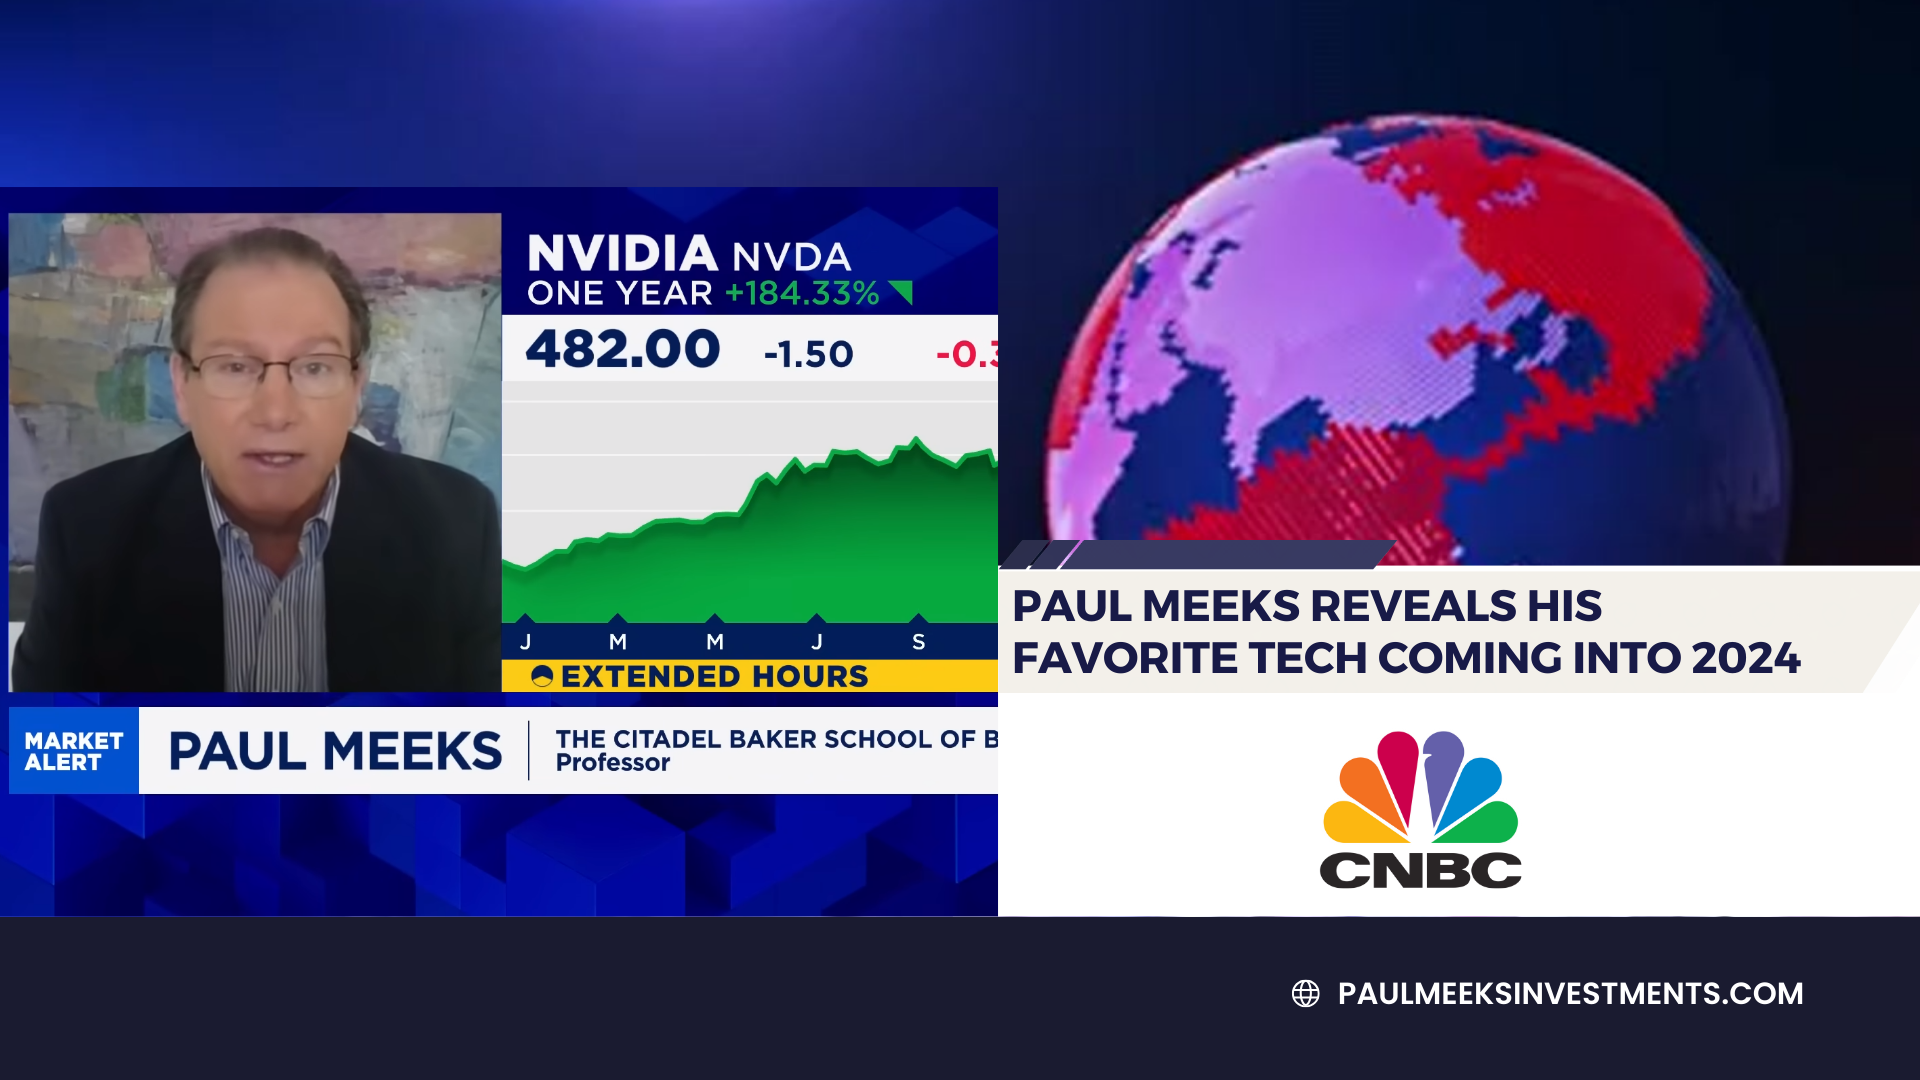 Paul Meeks Reveals His Favorite Tech Coming Into 2024